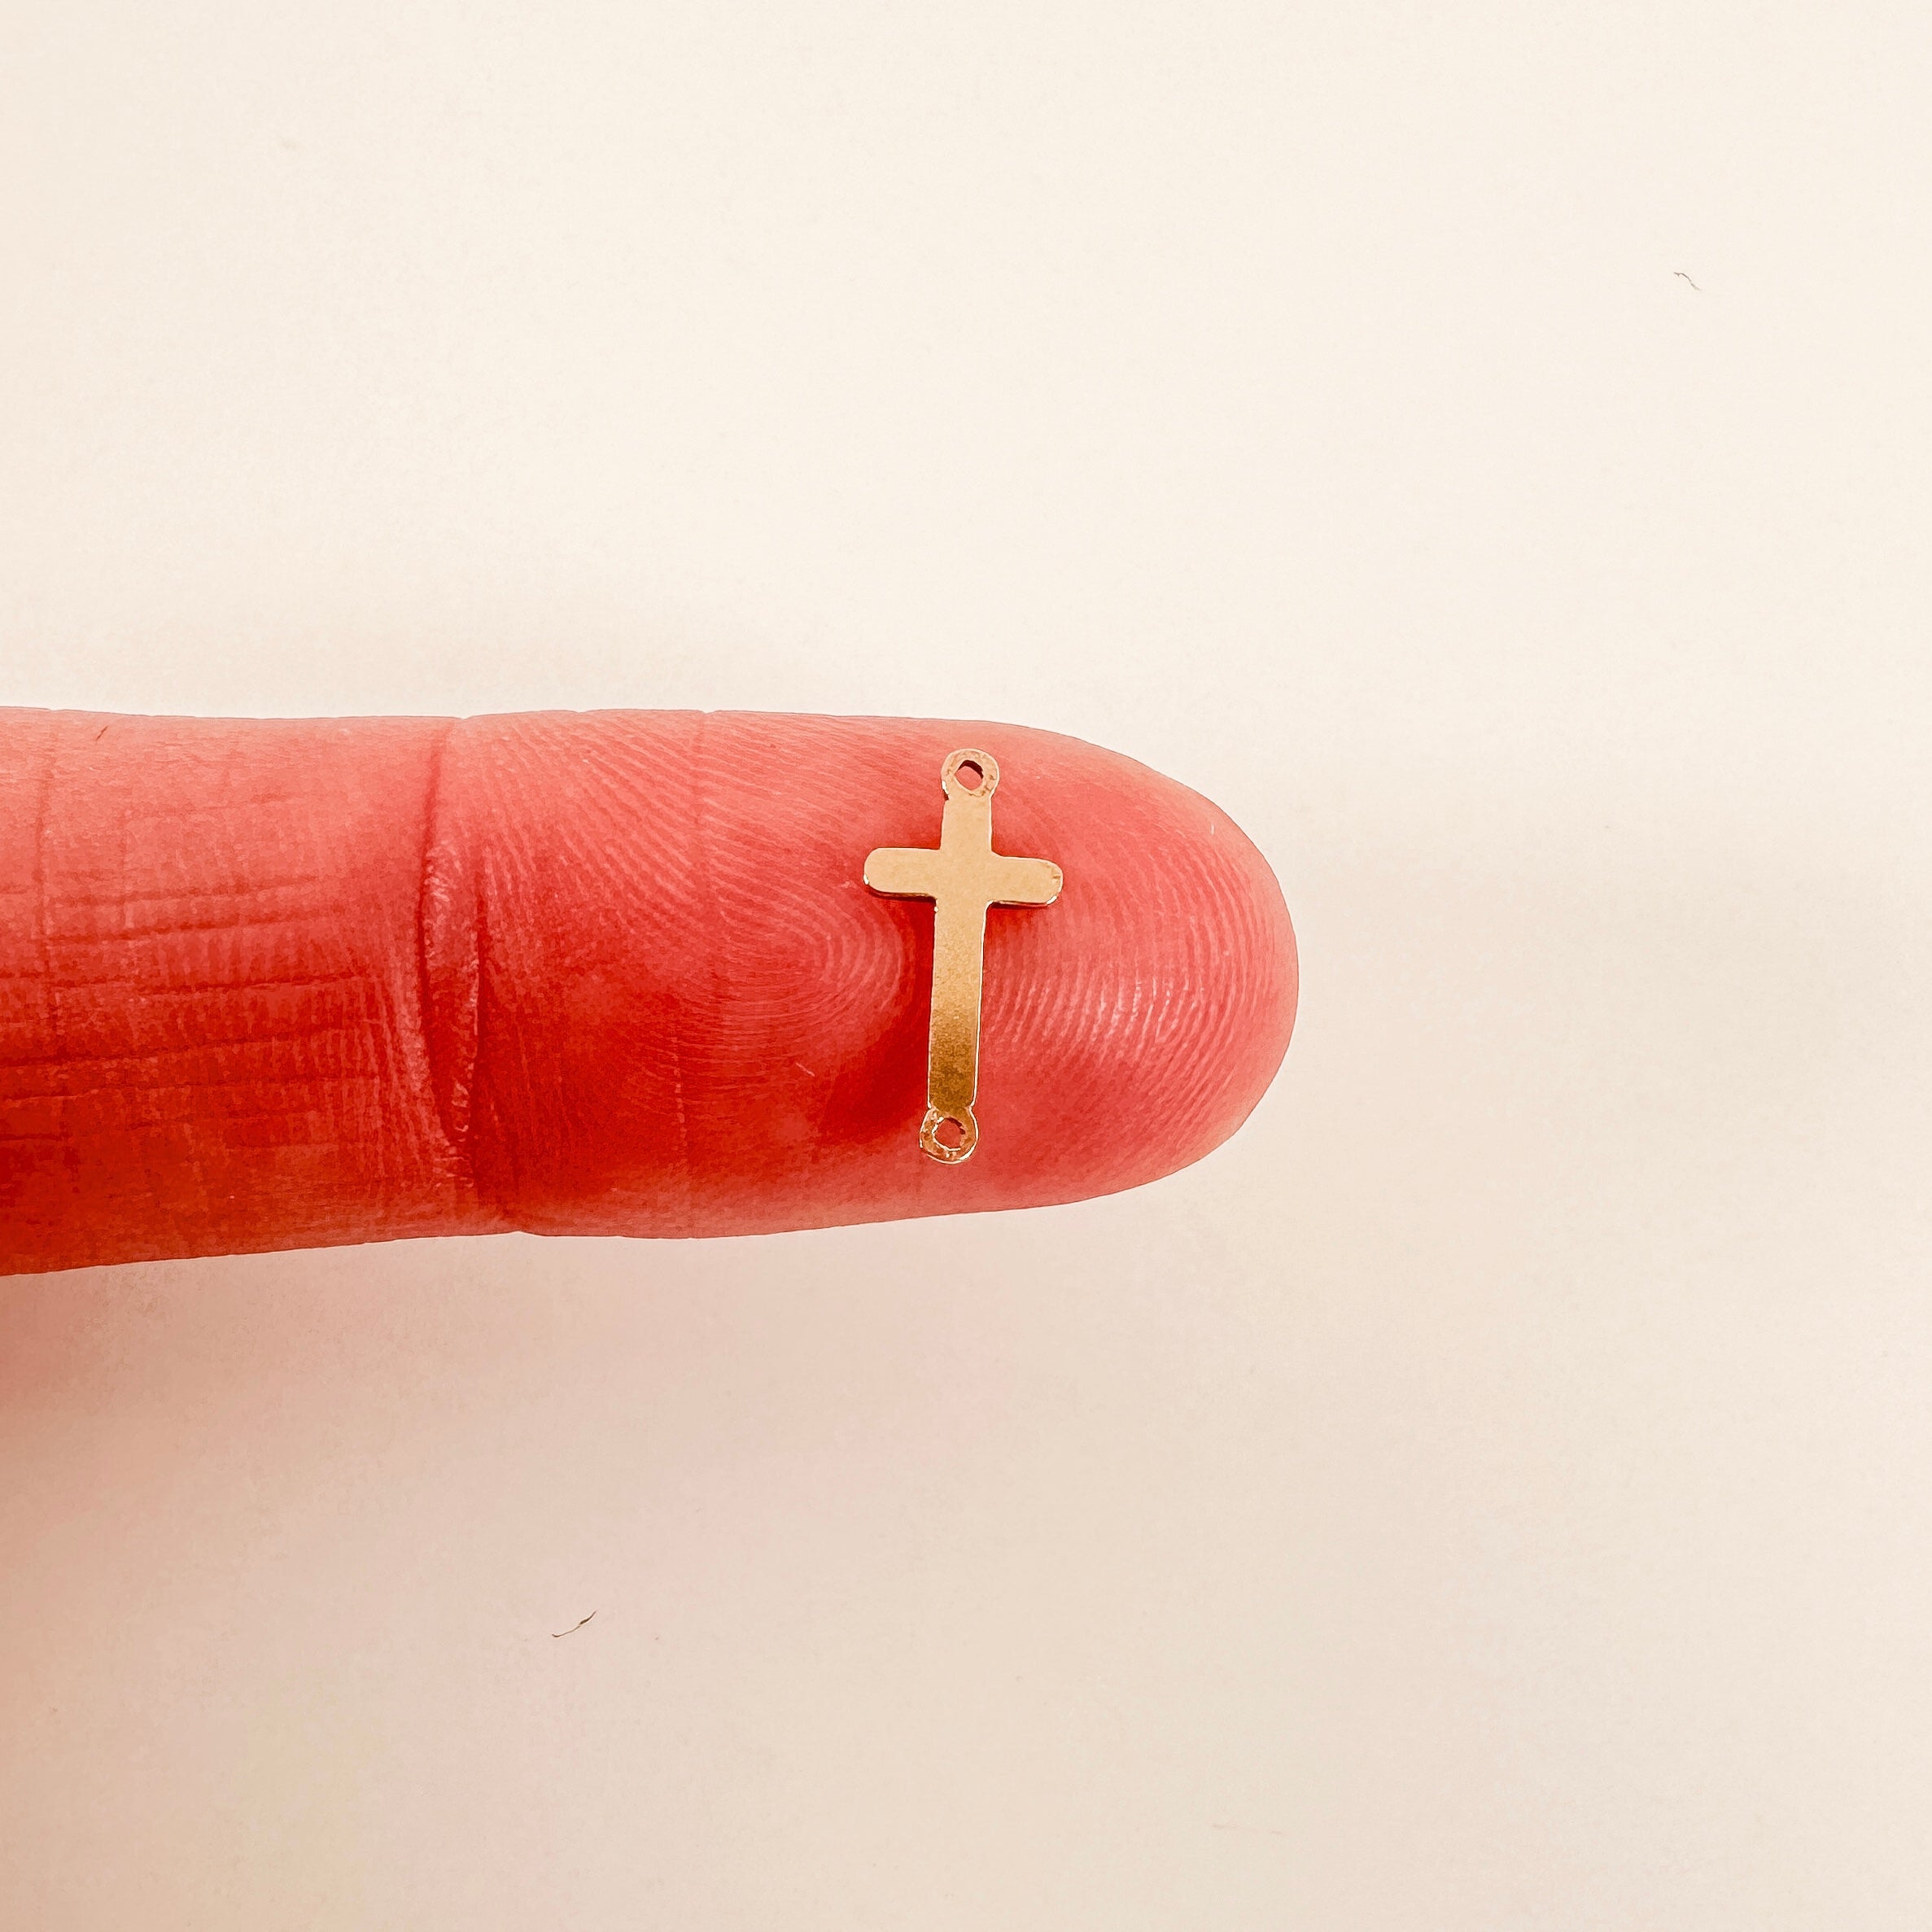 gold filled connectors, gold filled charms, permanent jewelry charms, permanent jewelry supplies, cross connector, sterling silver charms, sterling silver cross charm, gold filled cross charm